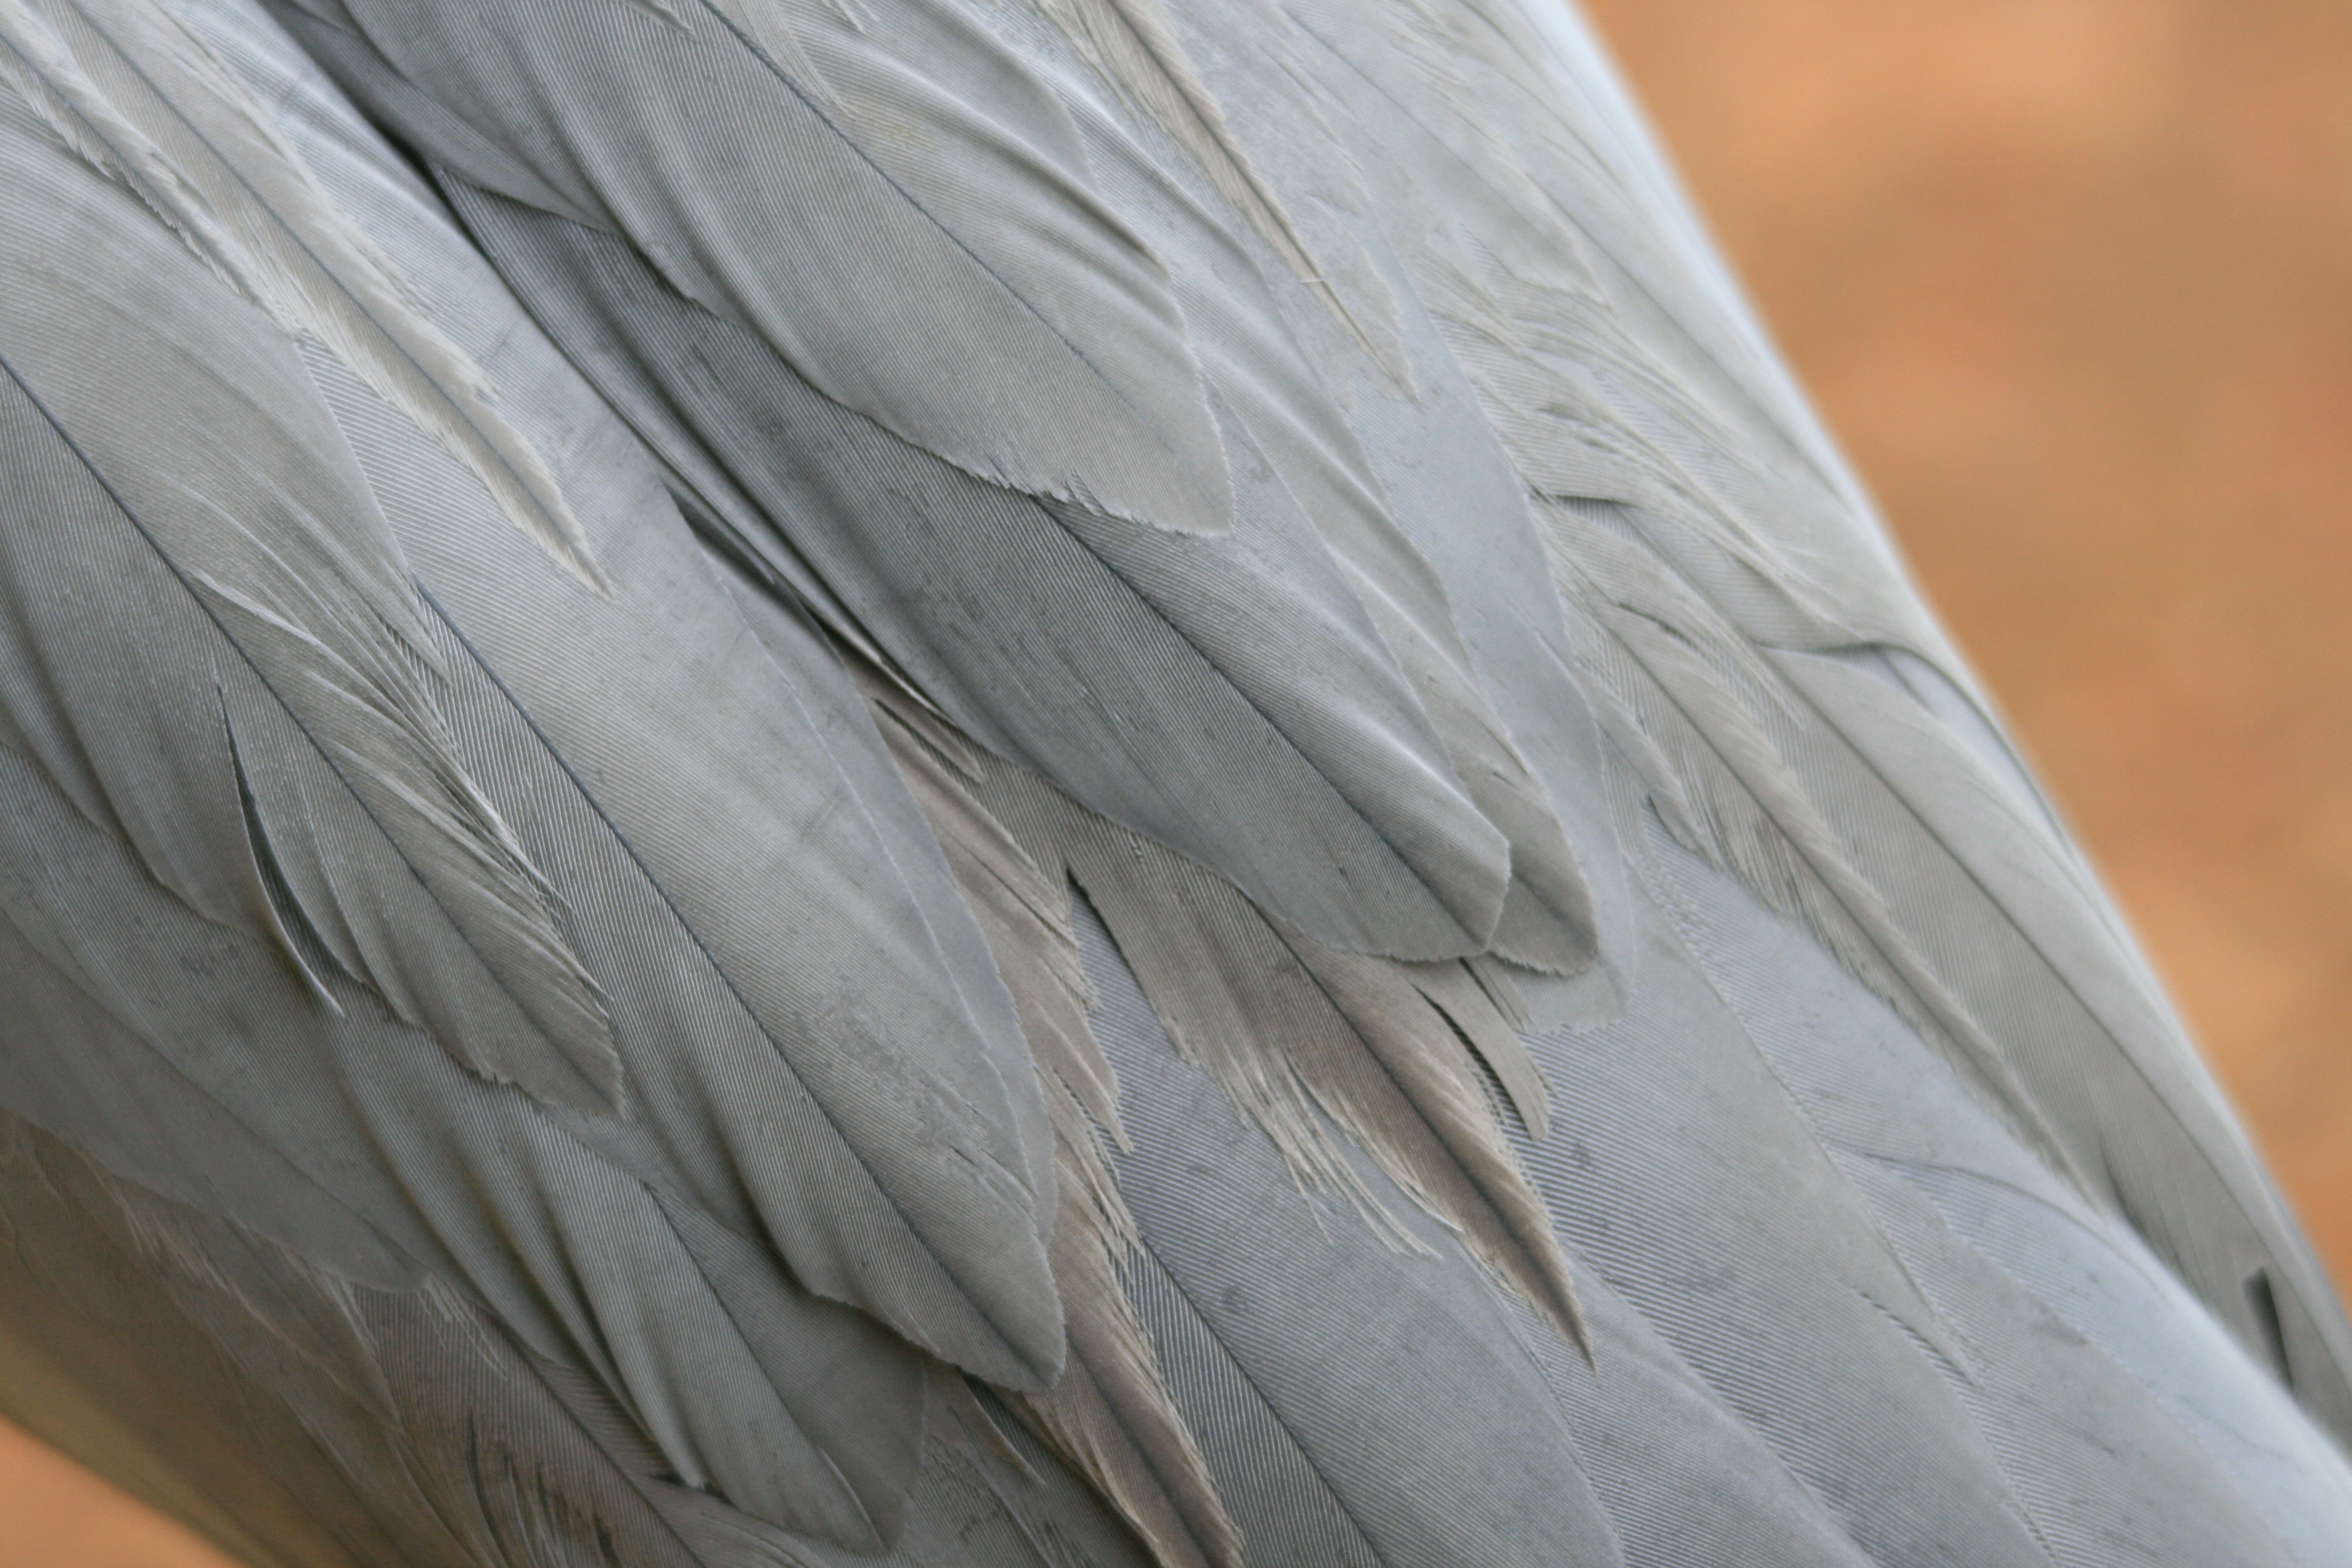 gray feather